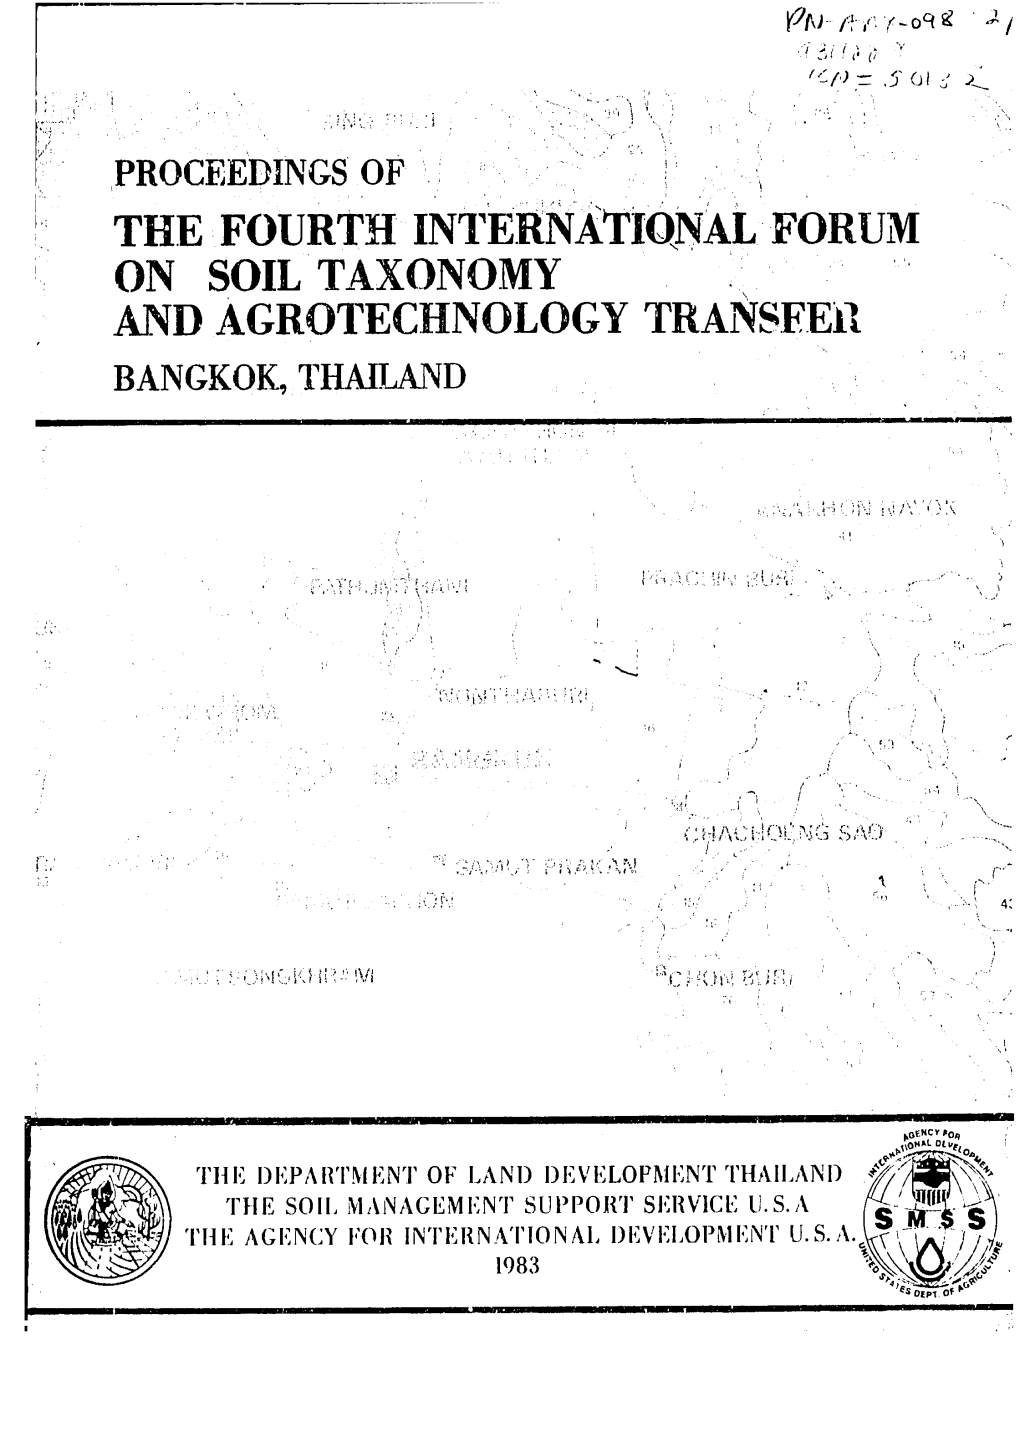 The Fourth International Forum on Soil Taxonomy and Agrotechnology Transfer Bangkok, Thar-And